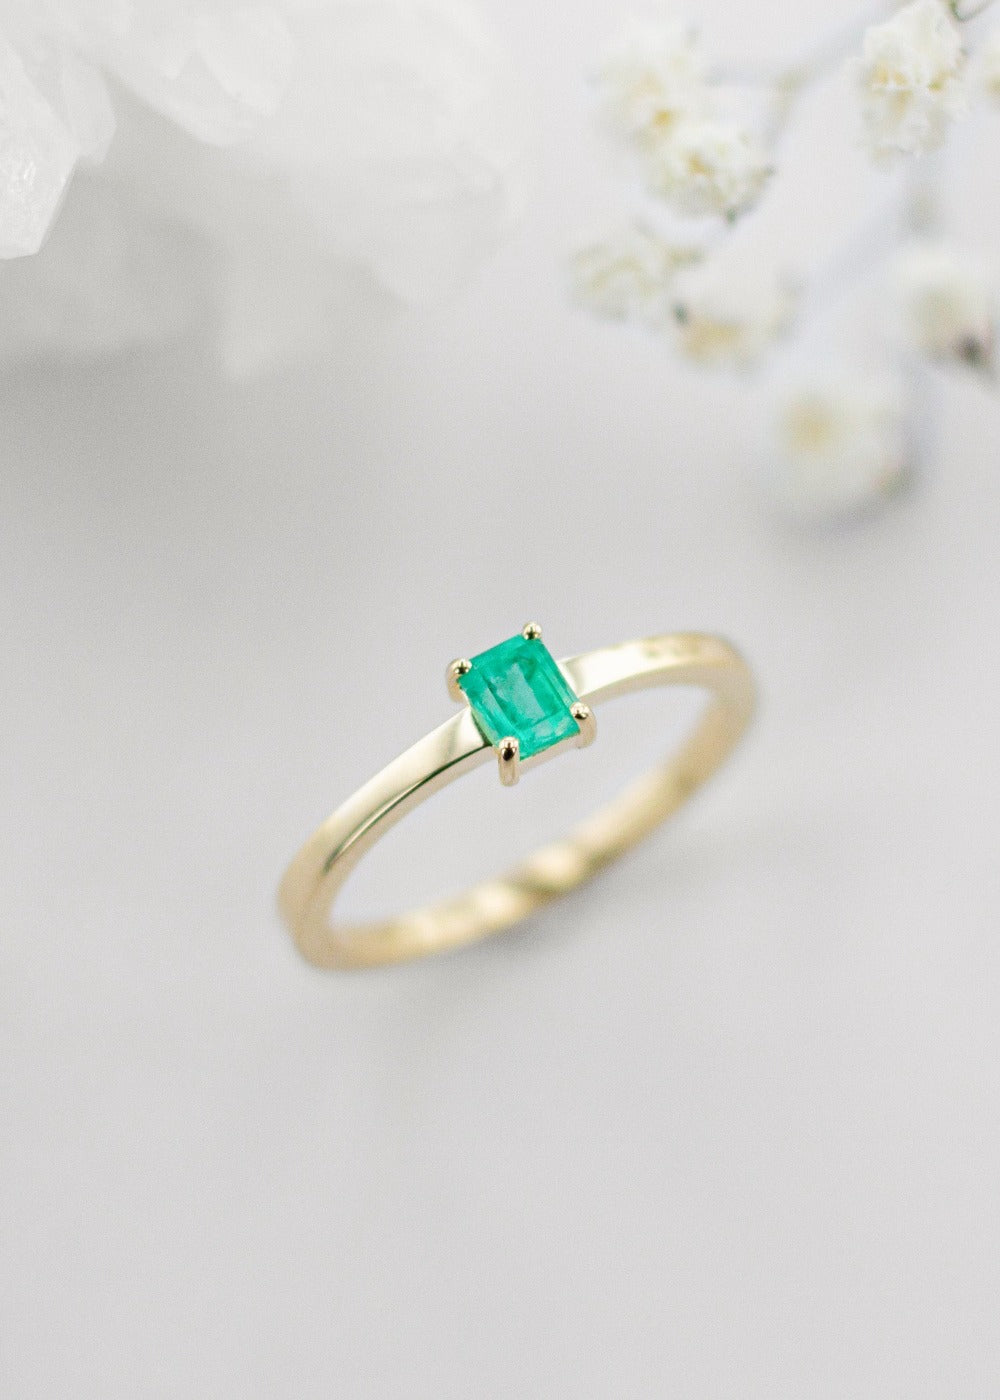 Our vega ring in yellow gold with a small emerald cut emerald. This super dainty ring is perfect for everyday wear!